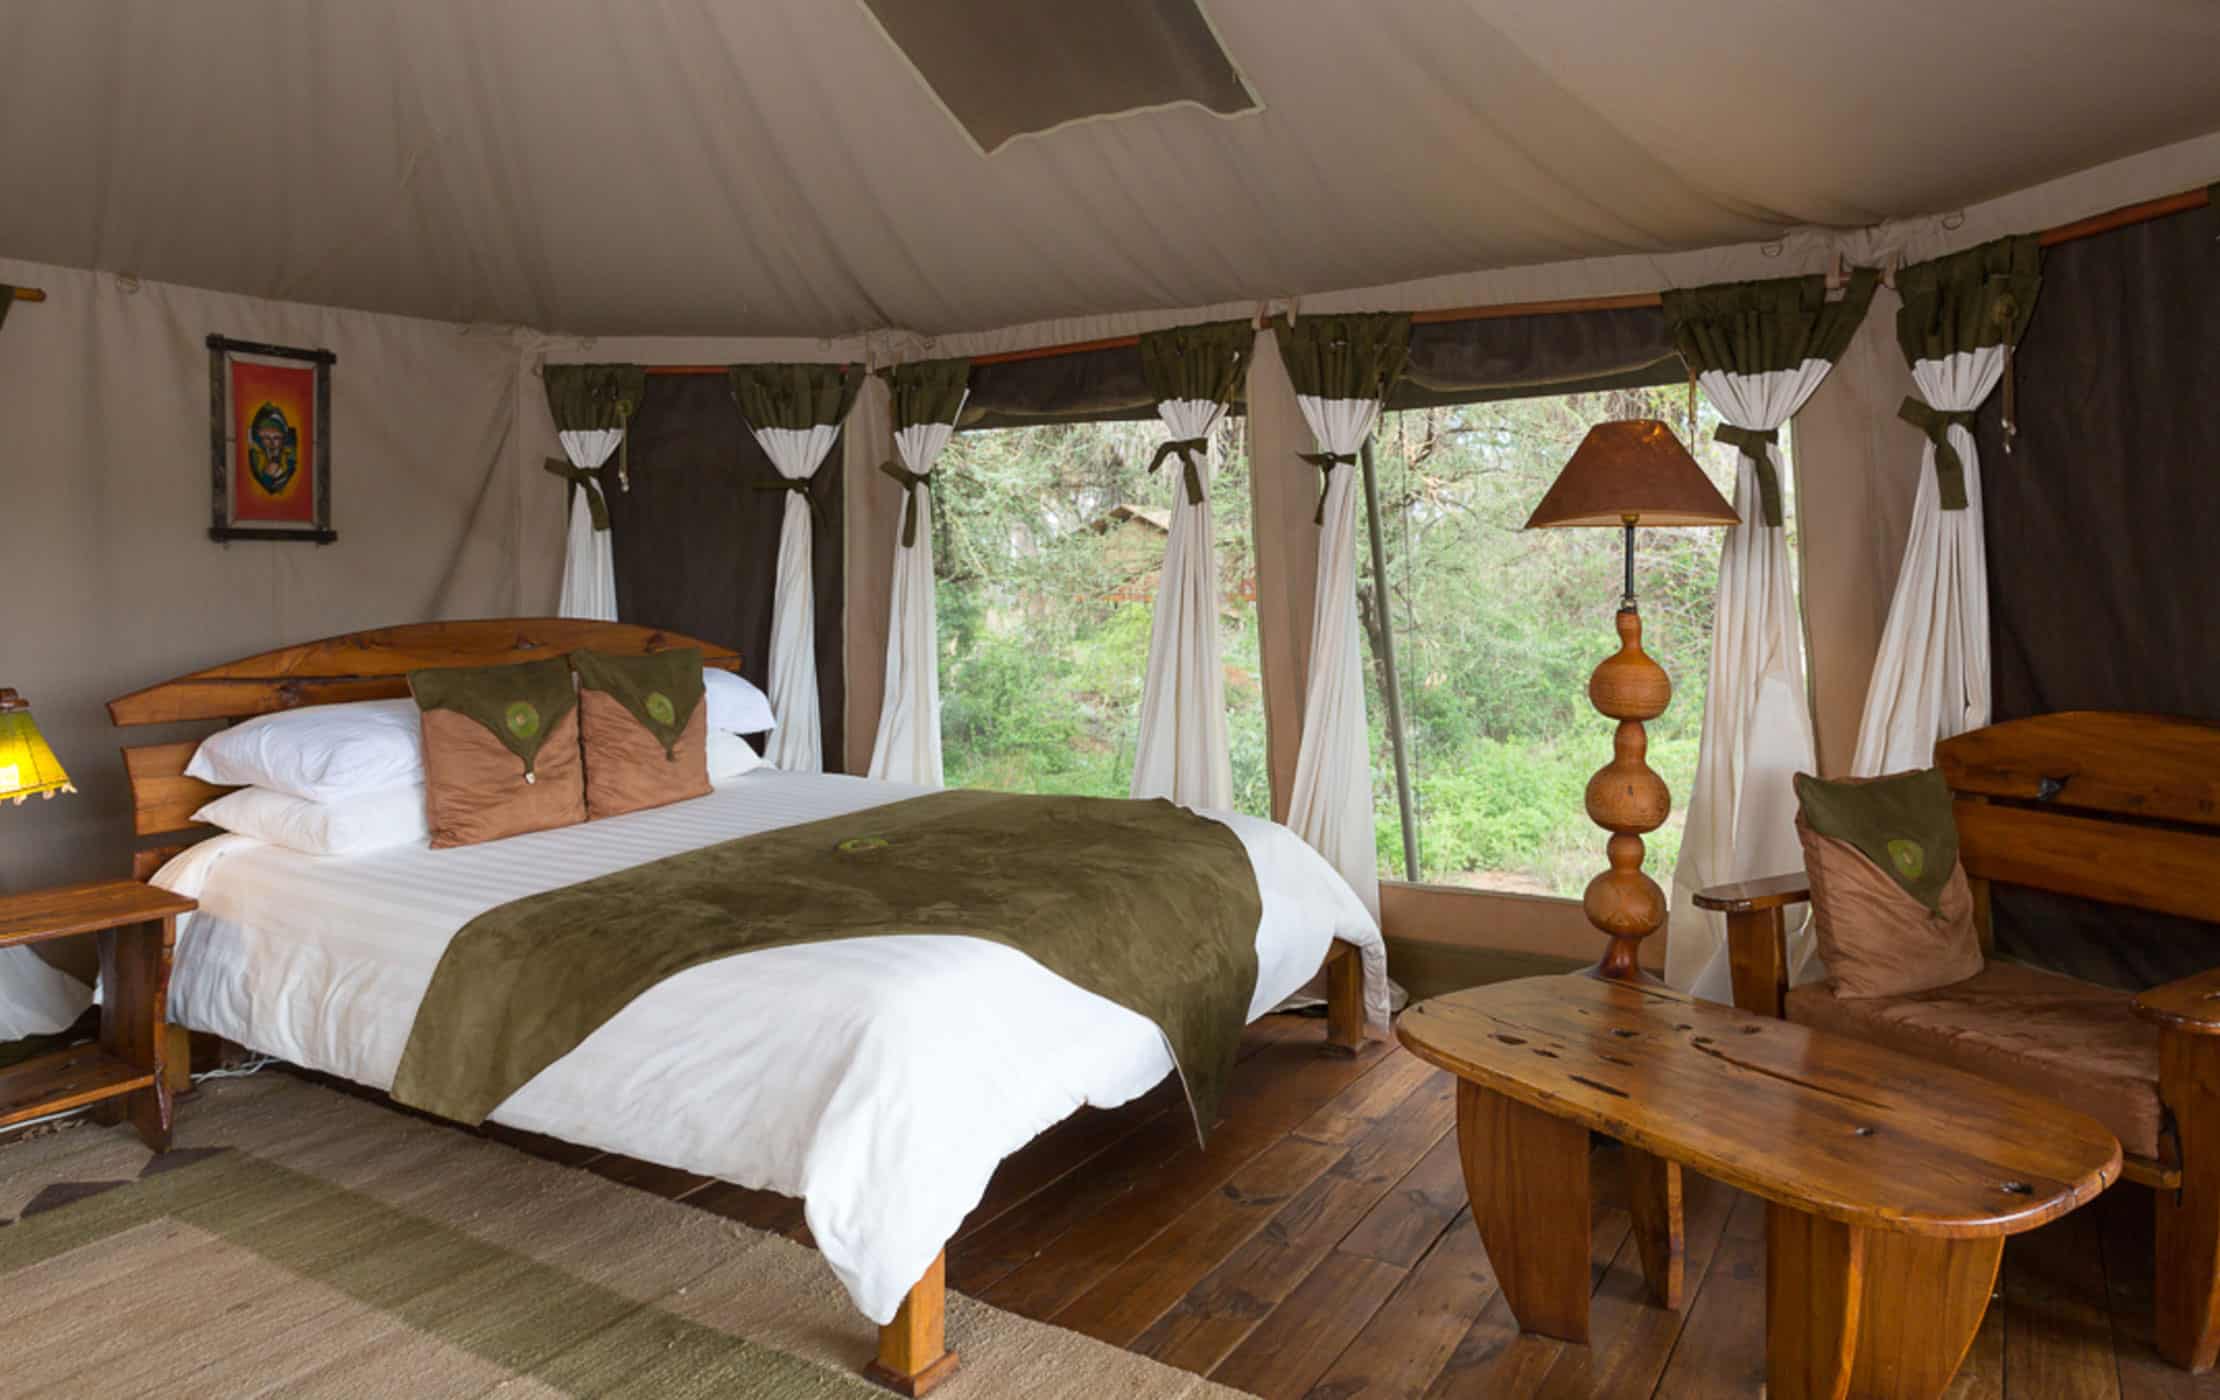 An interior shot of the bedroom at the Elephant Bedroom Camp.